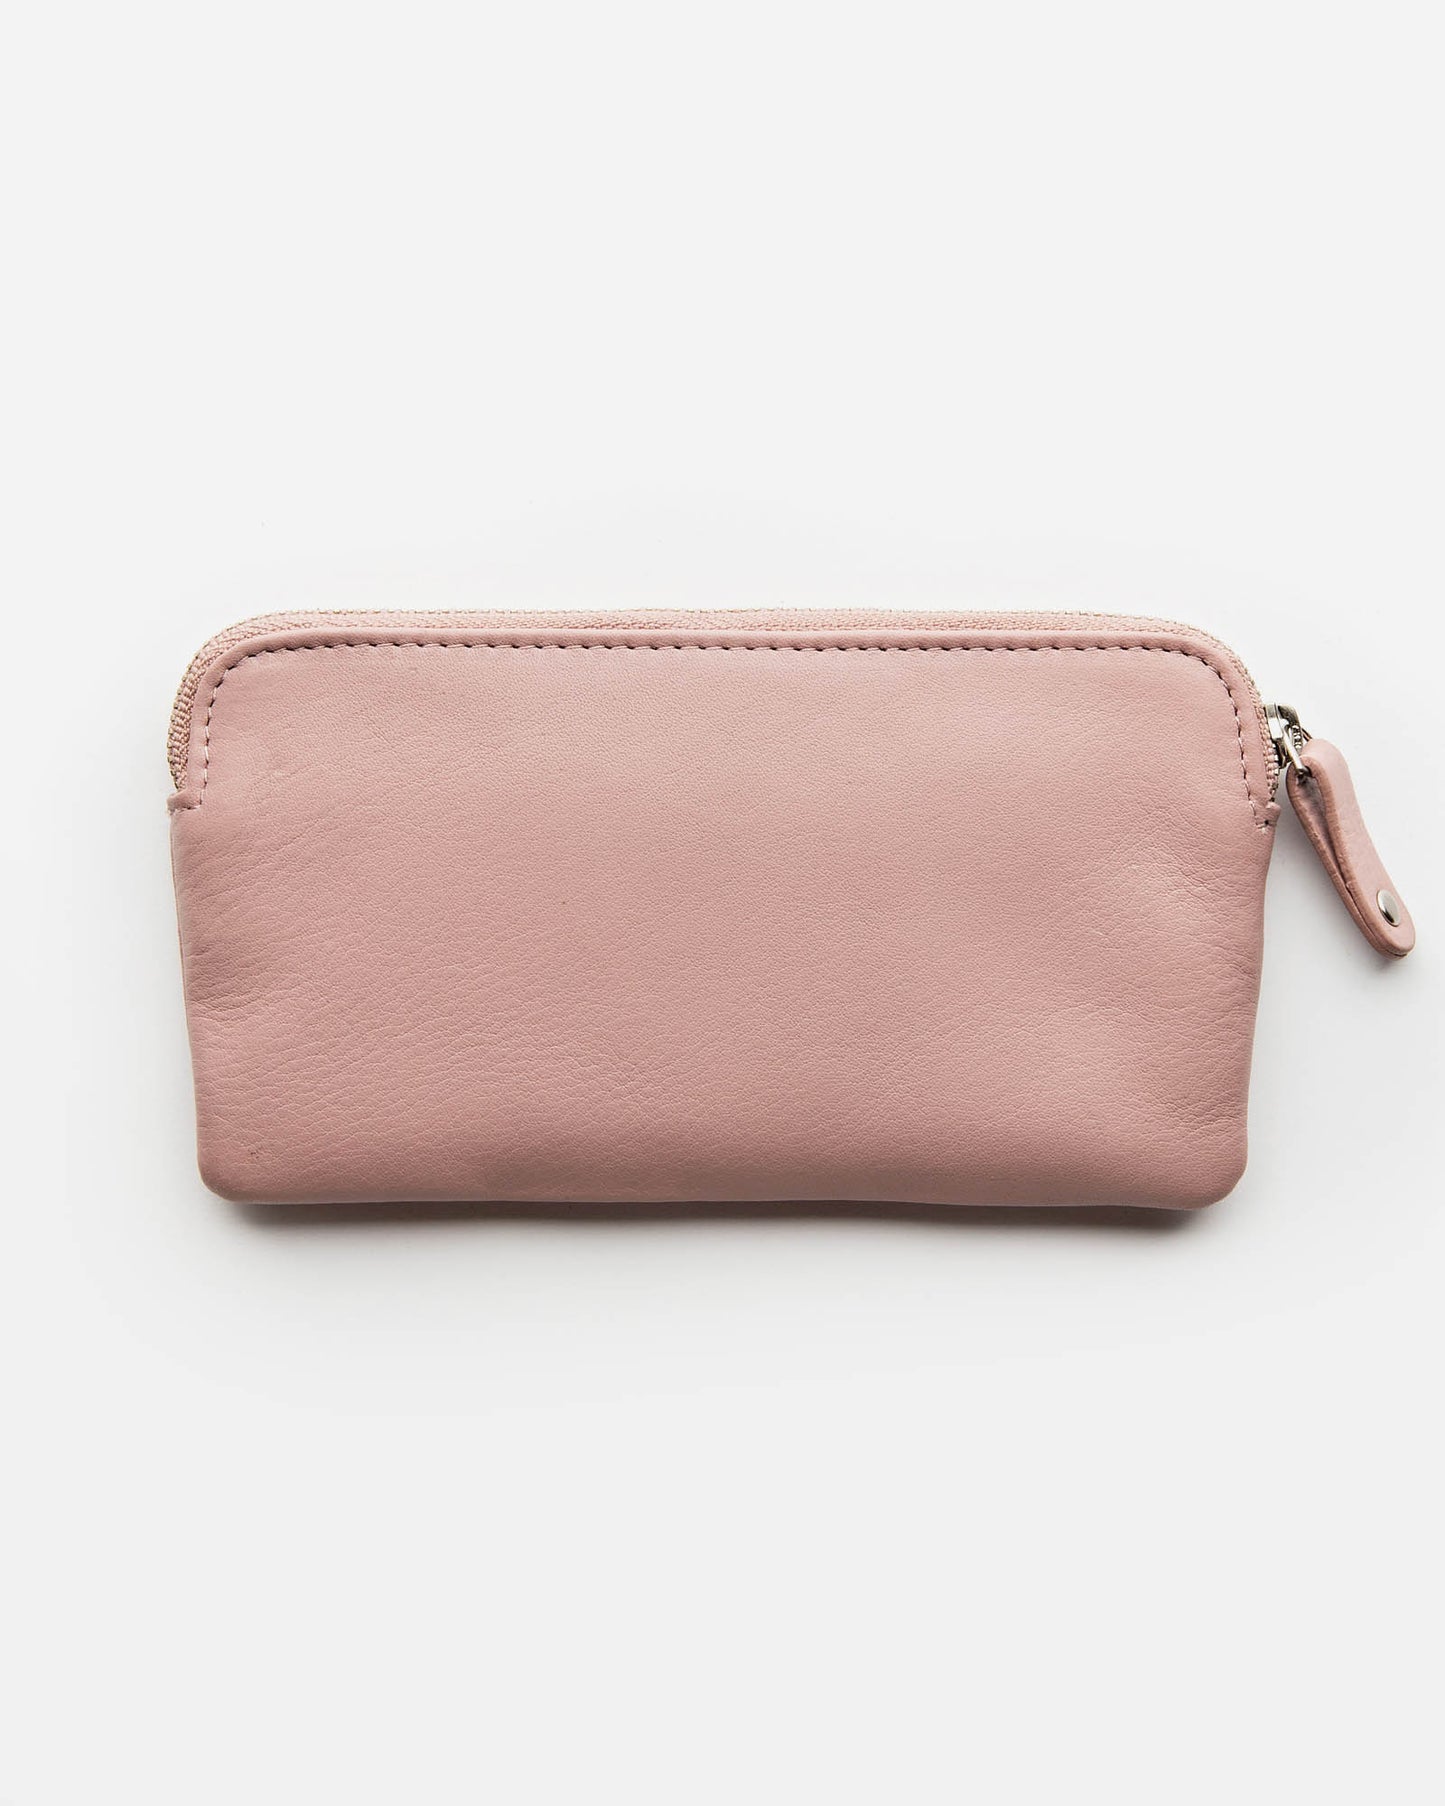 STITCH & HIDE LUCY POUCH